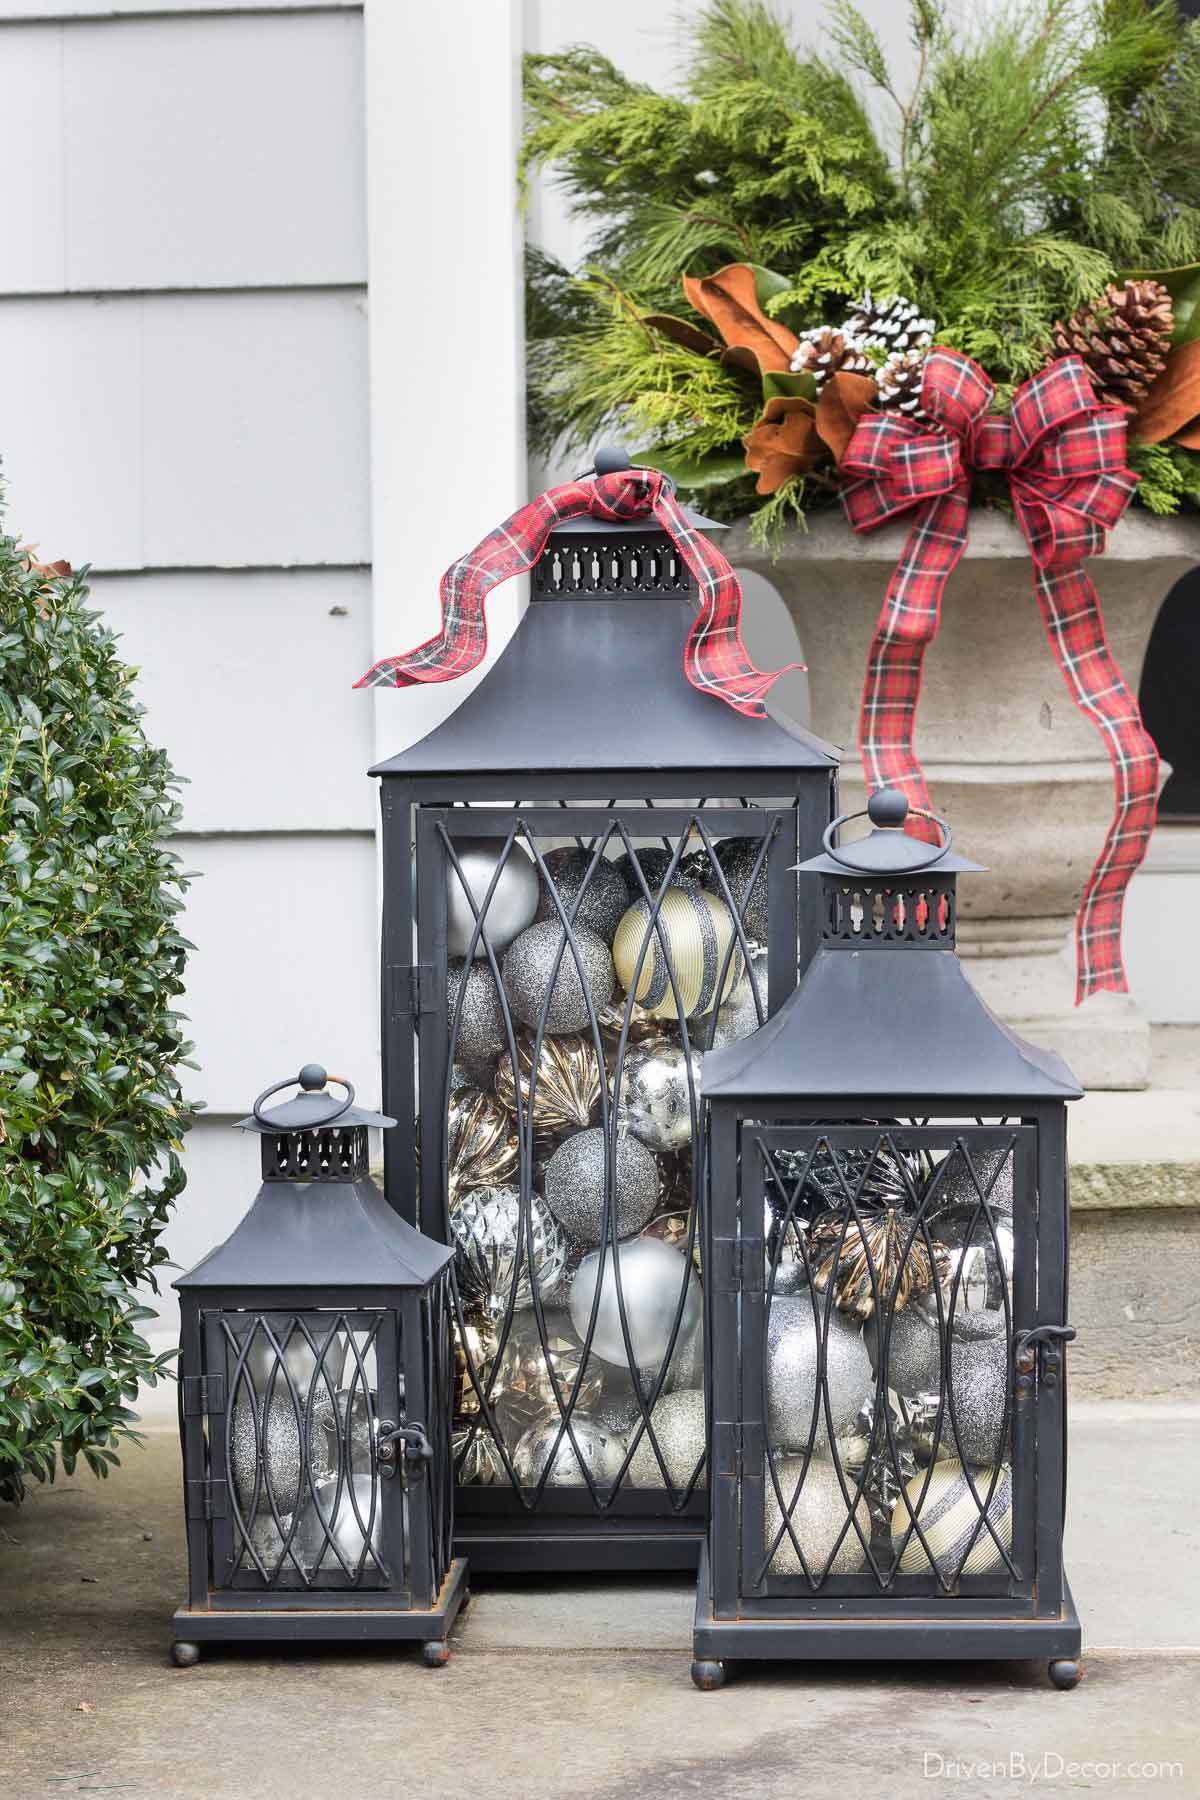 Fill lanterns with ornaments - such a simple Christmas decorating idea!